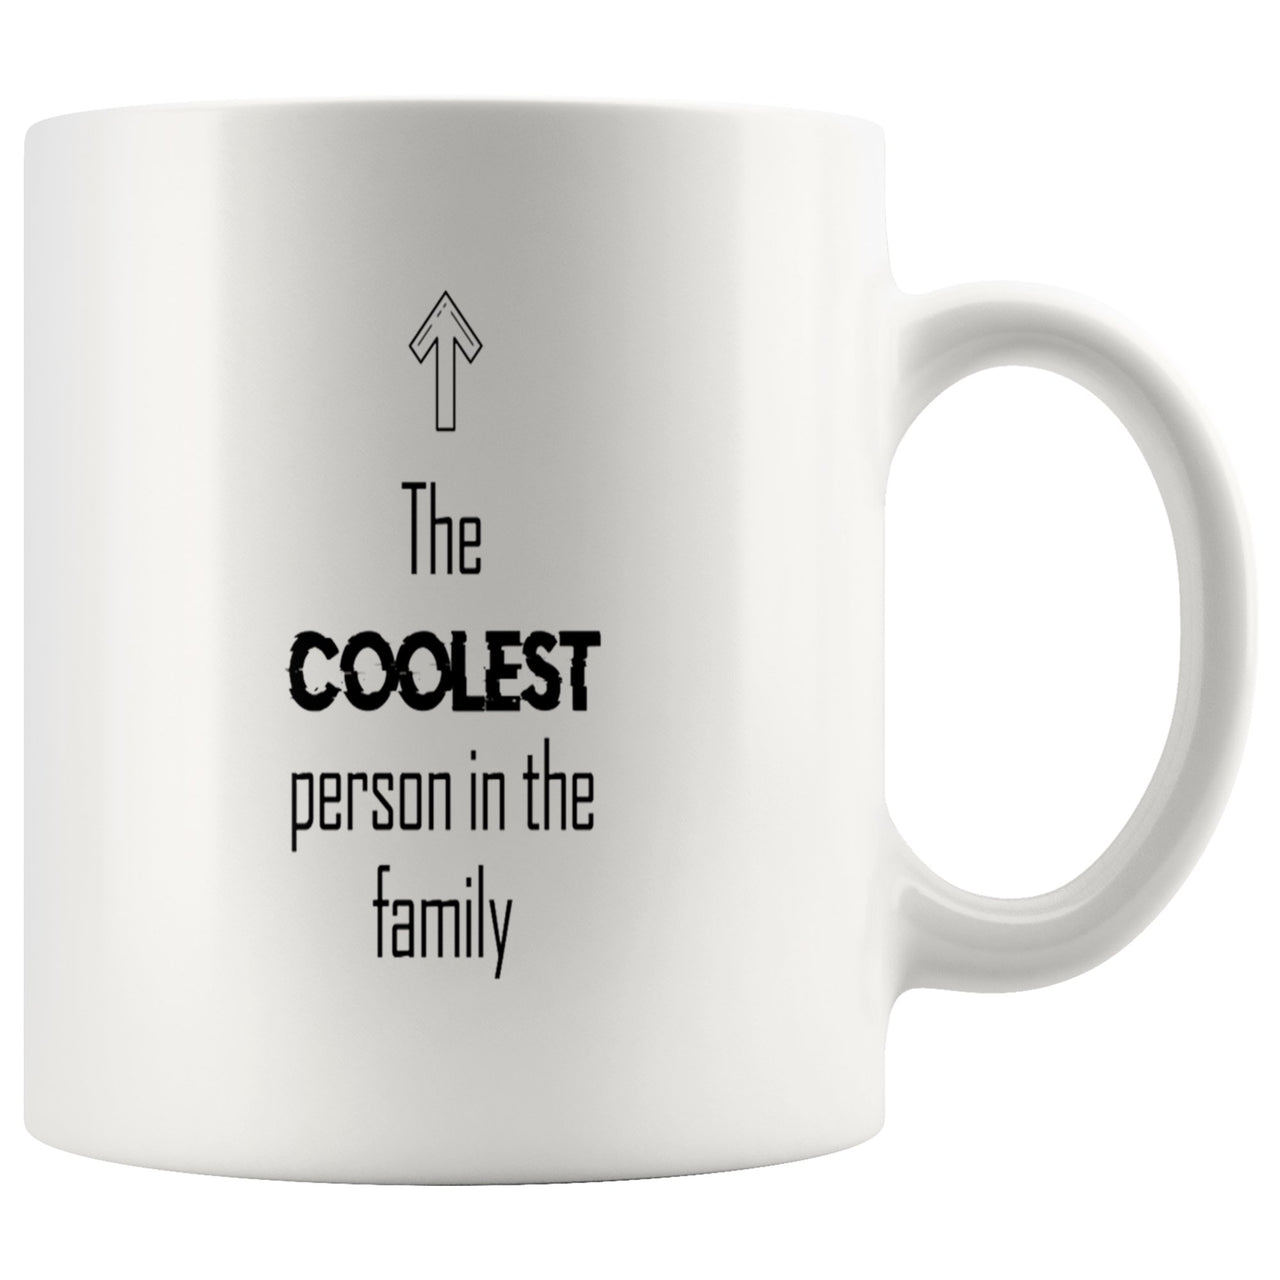 The Coolest Person In the Family Mug